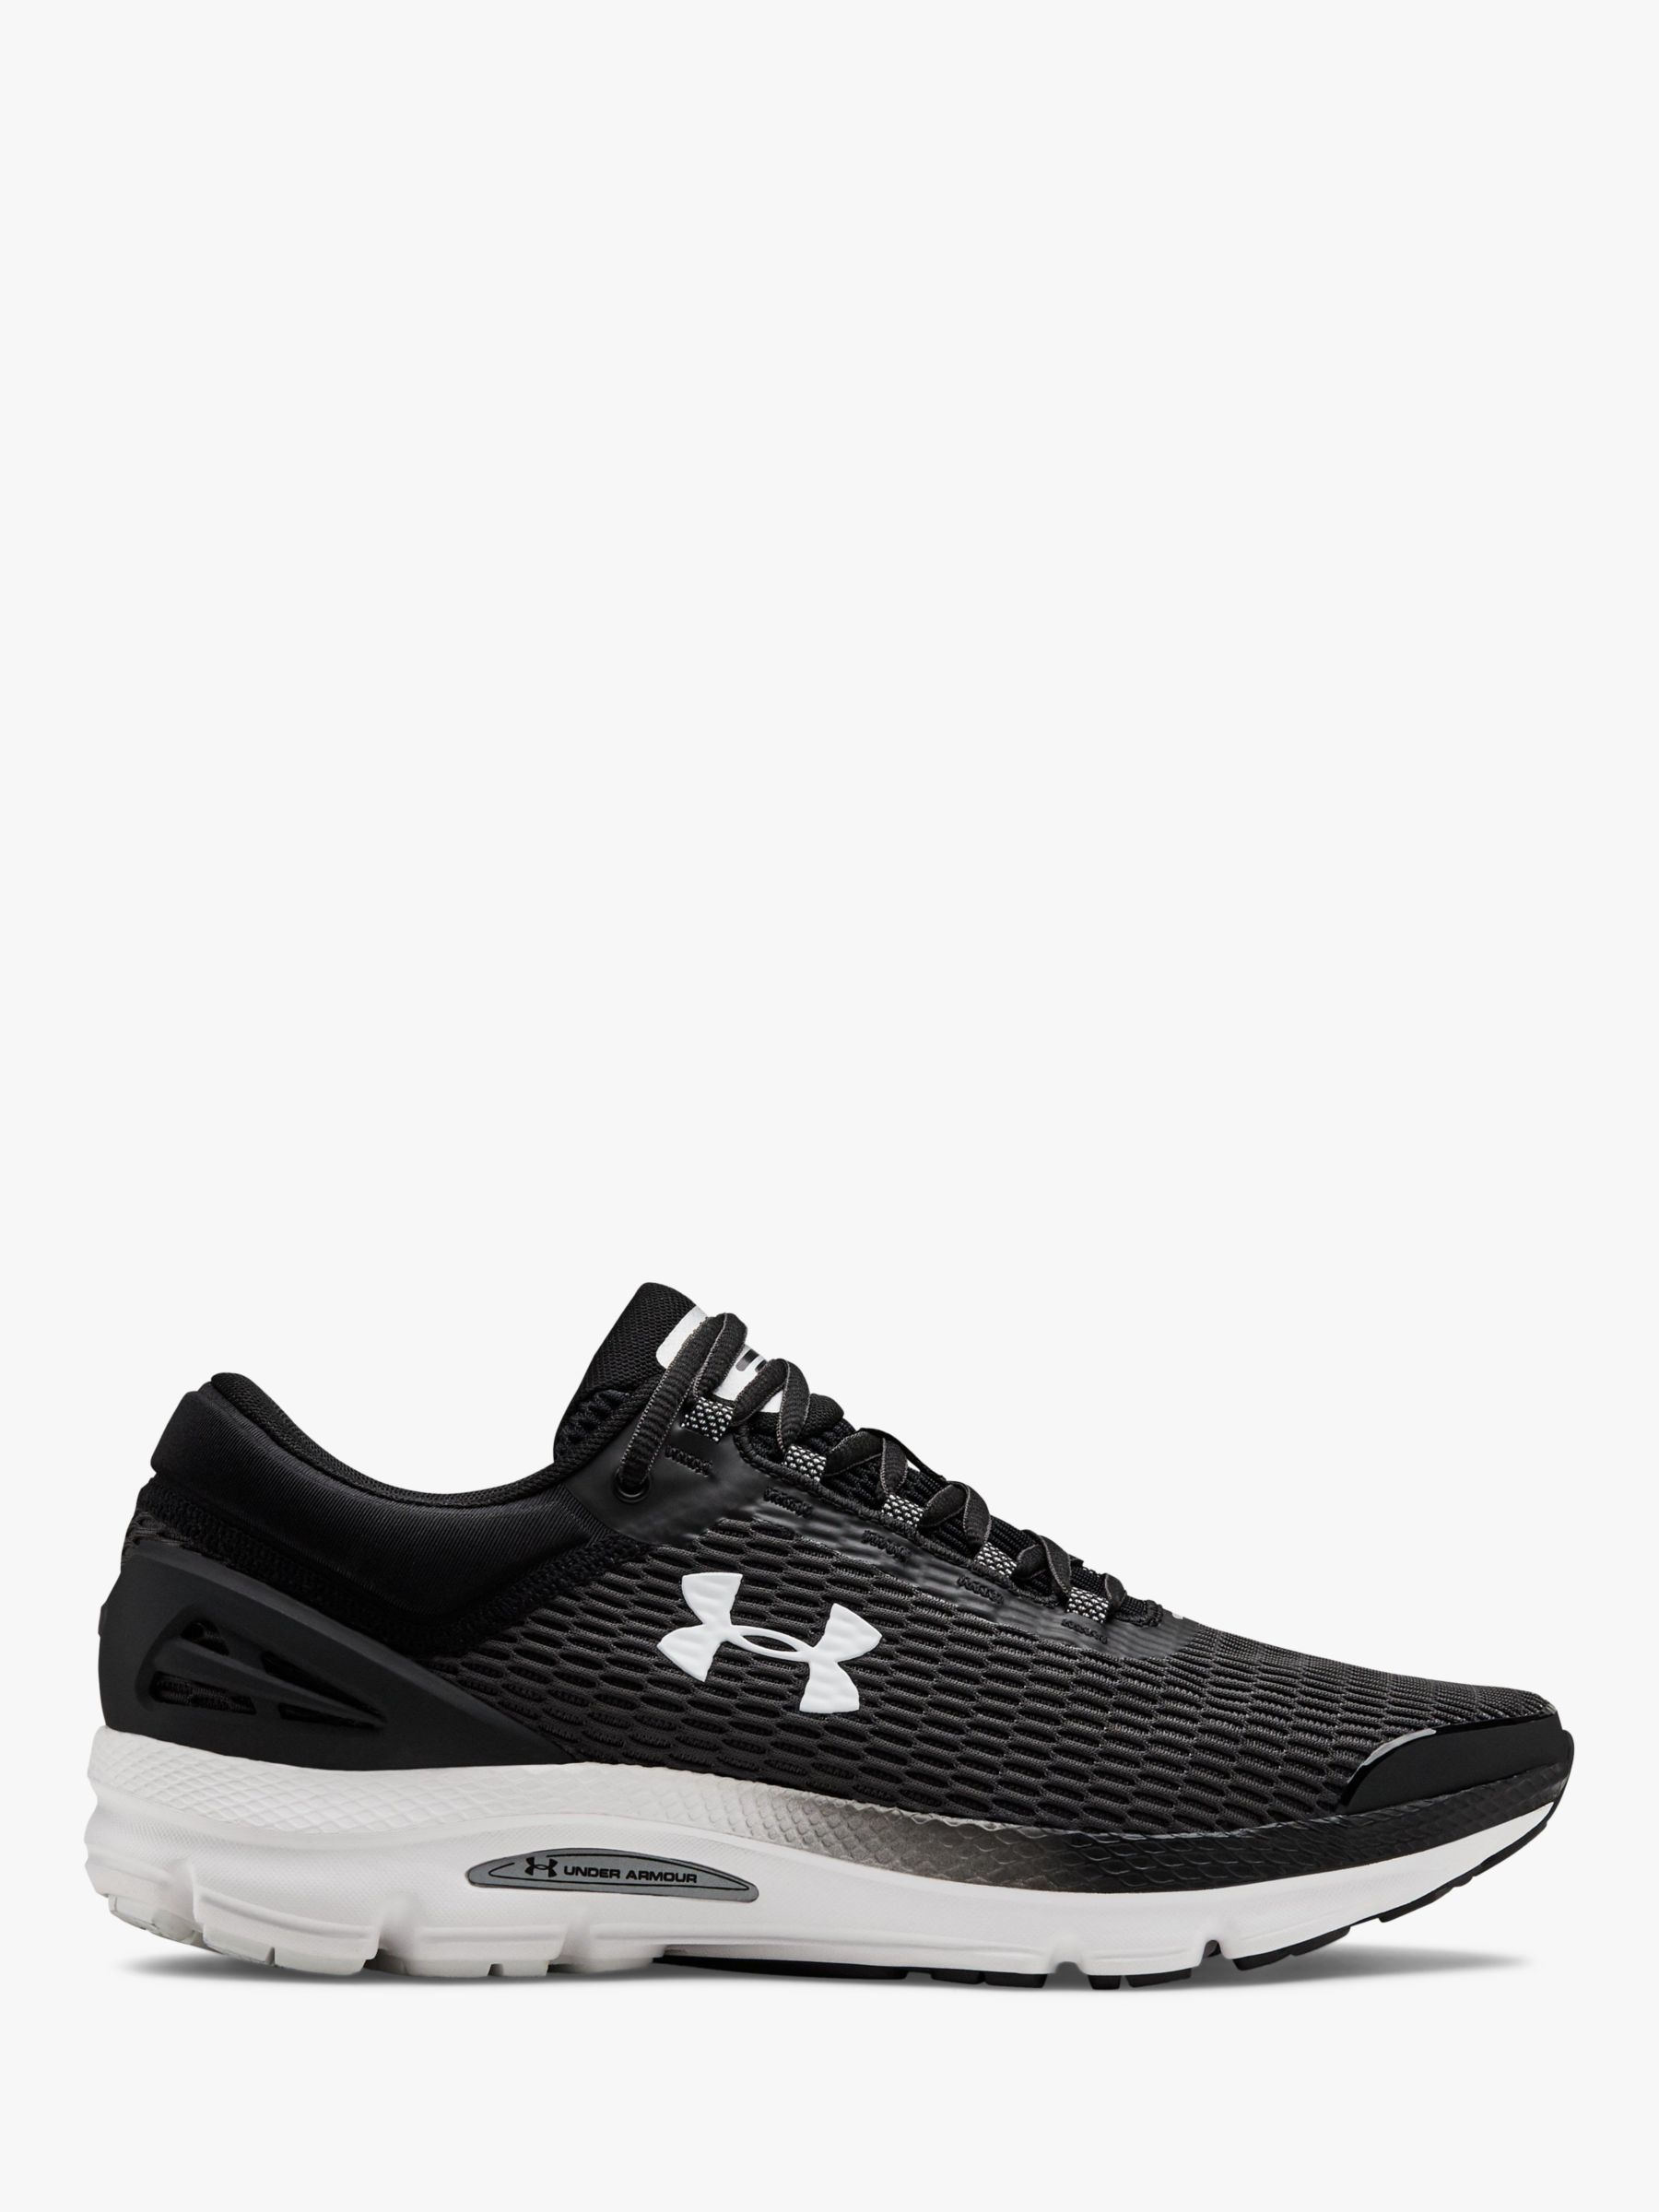 under armour charged intake 3 mens running shoes